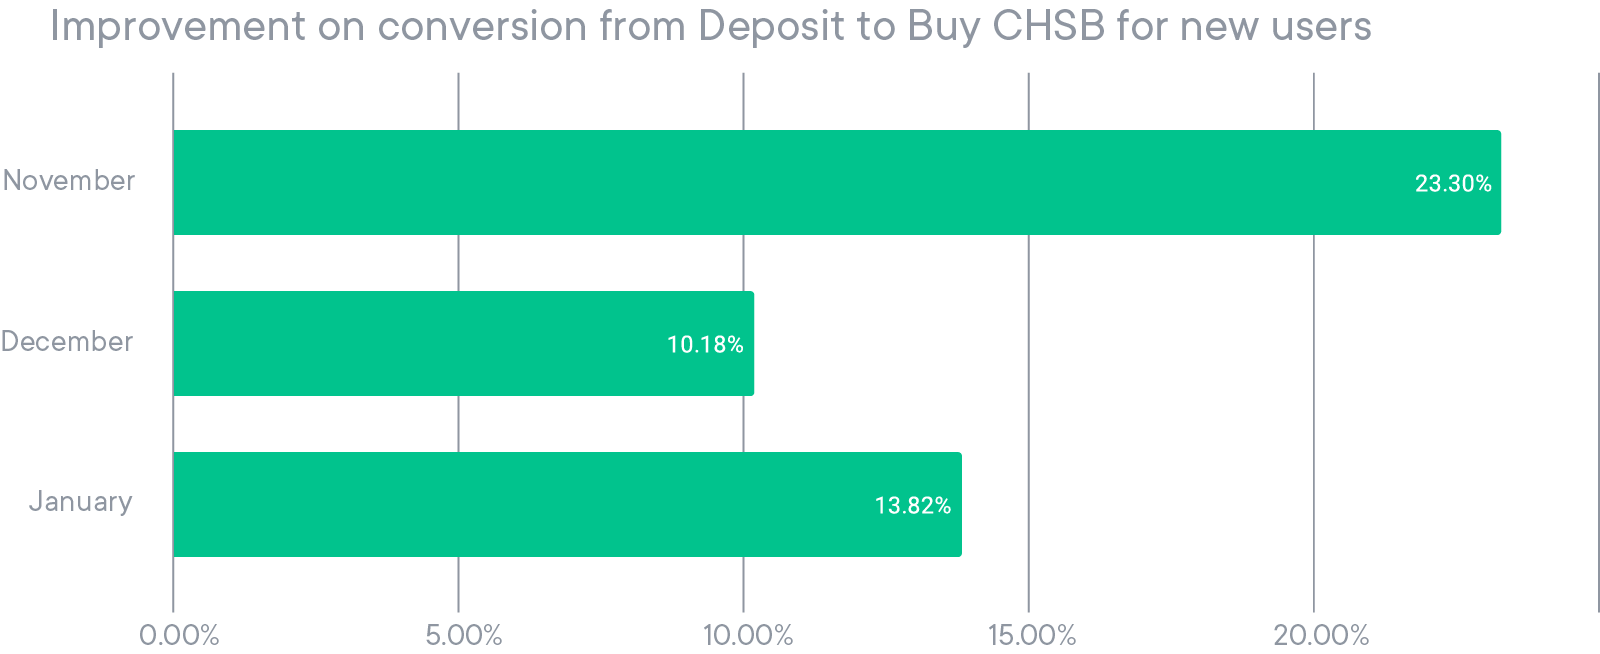 Improvement on conversion from Deposit to Buy CHSB for new users 